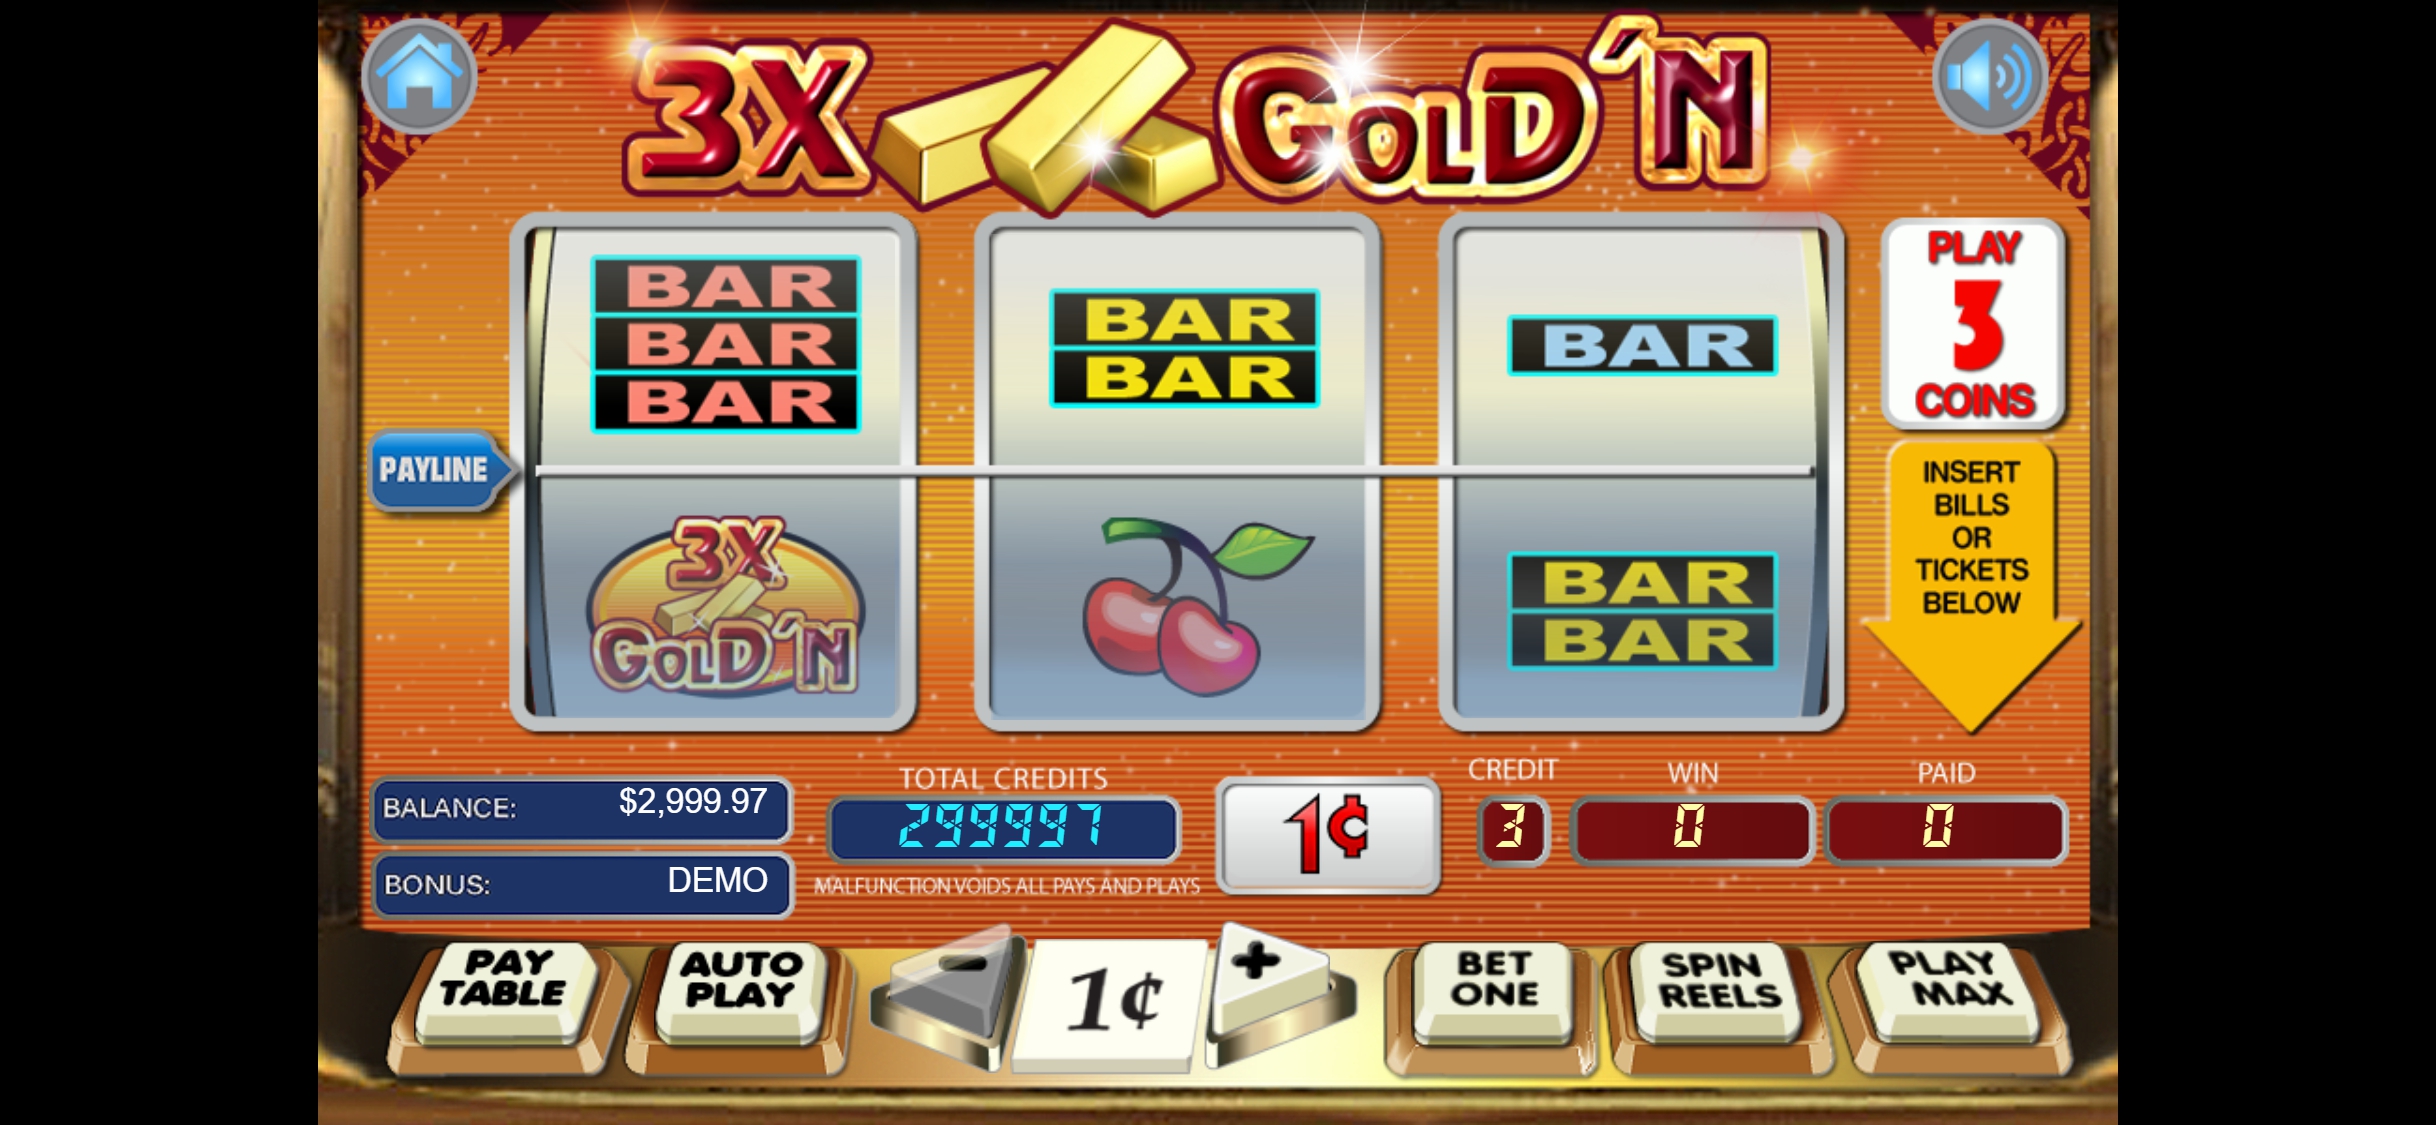 Red Stag Casino Mobile Slot Games Review